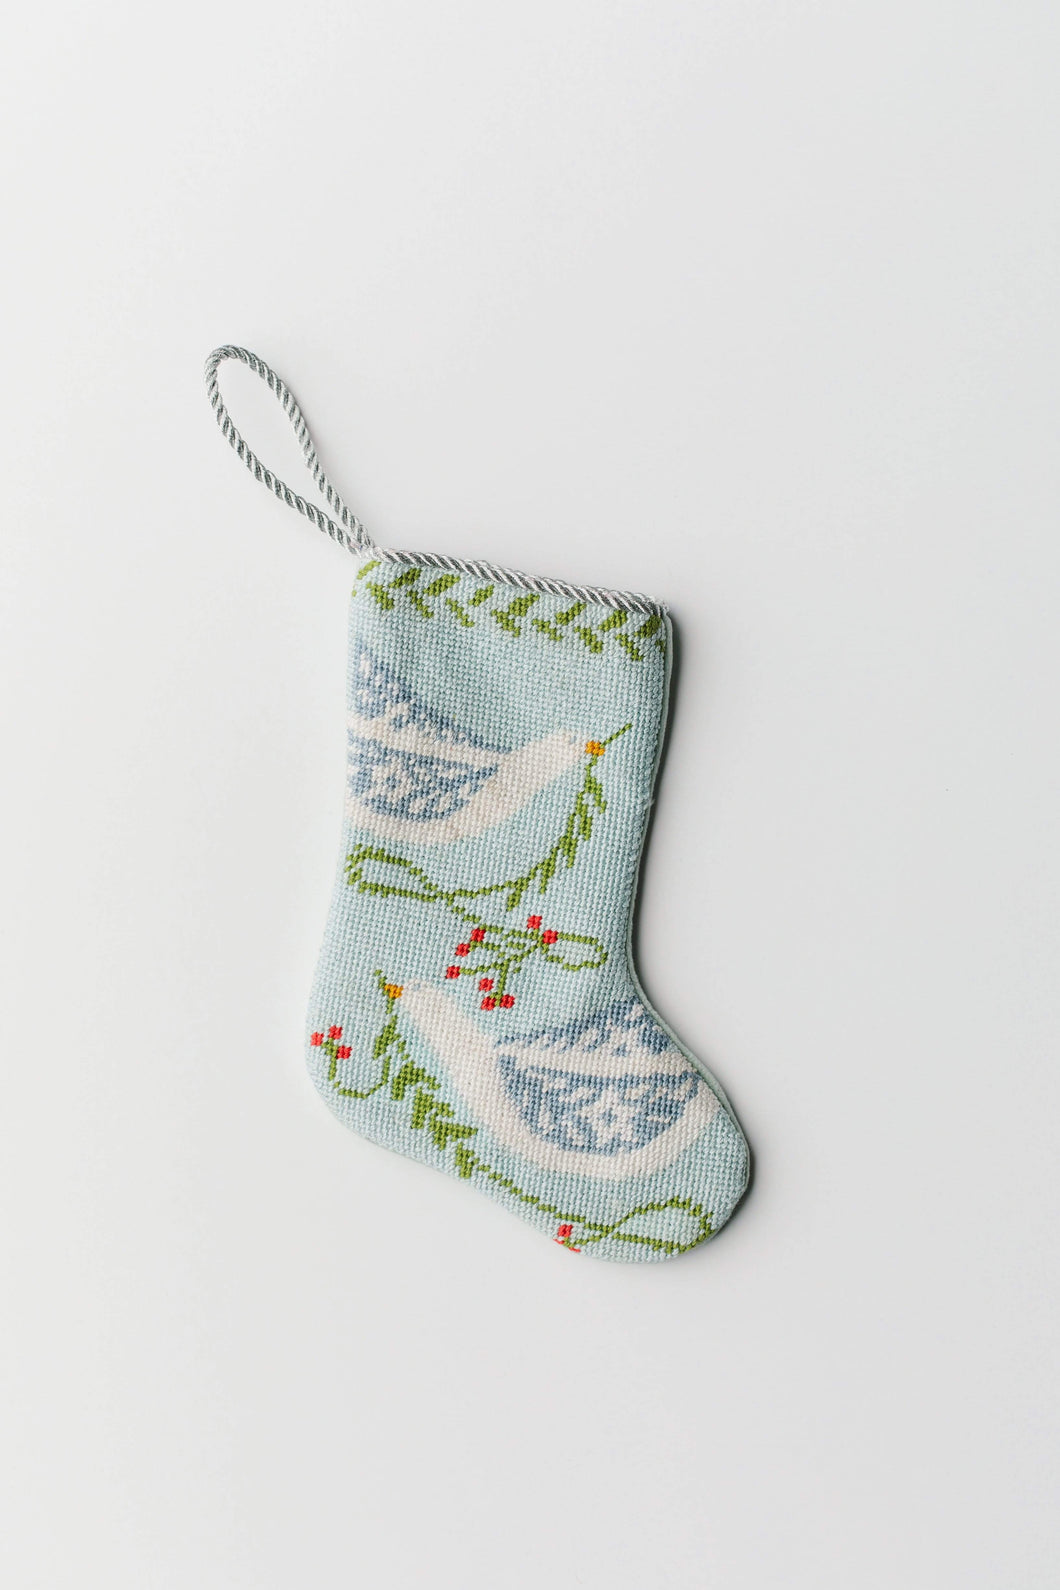 Bauble Stockings Bauble Stockings Peace on Earth- Blue